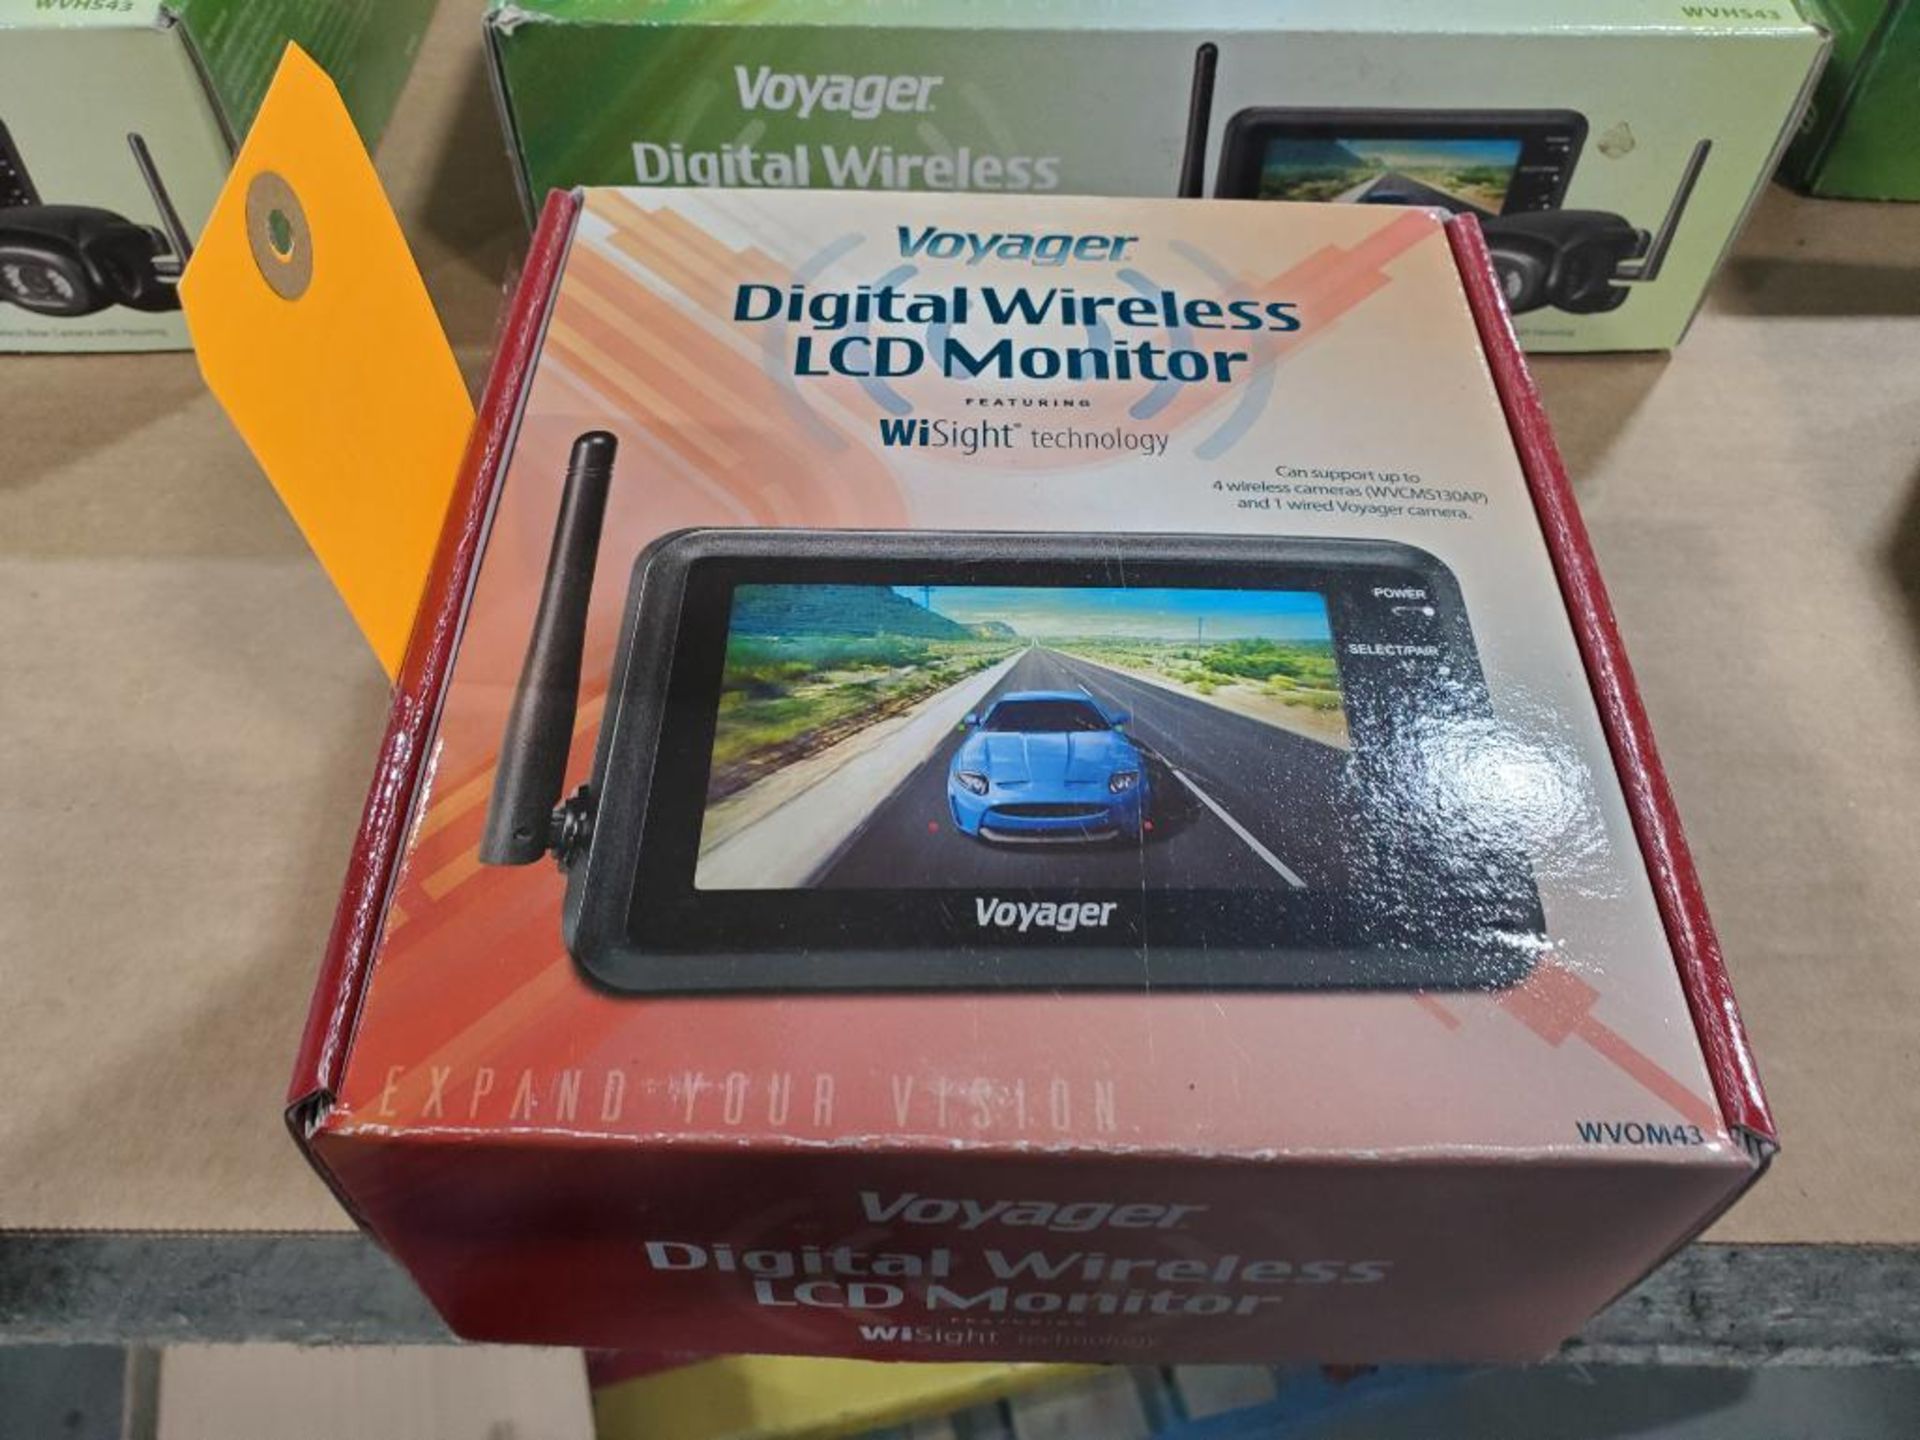 Voyager Digital Wireless LCD Monitor. Part number WVOM43.